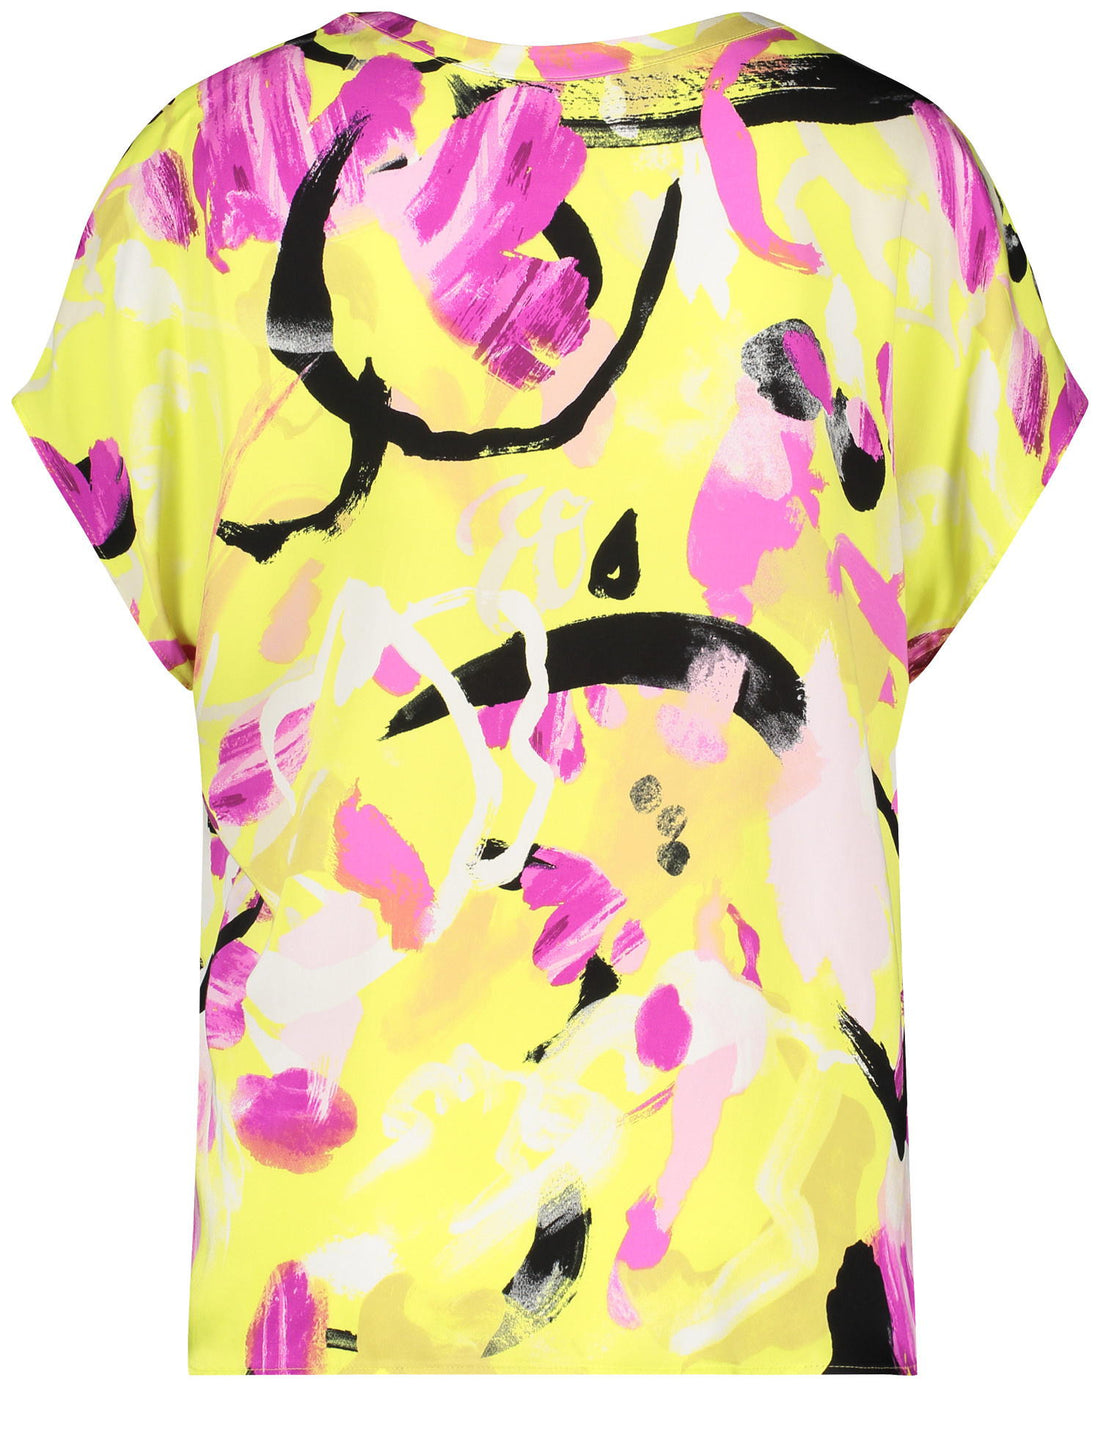 Short Sleeve Blouse With An All-Over Print_560312-11019_4142_02